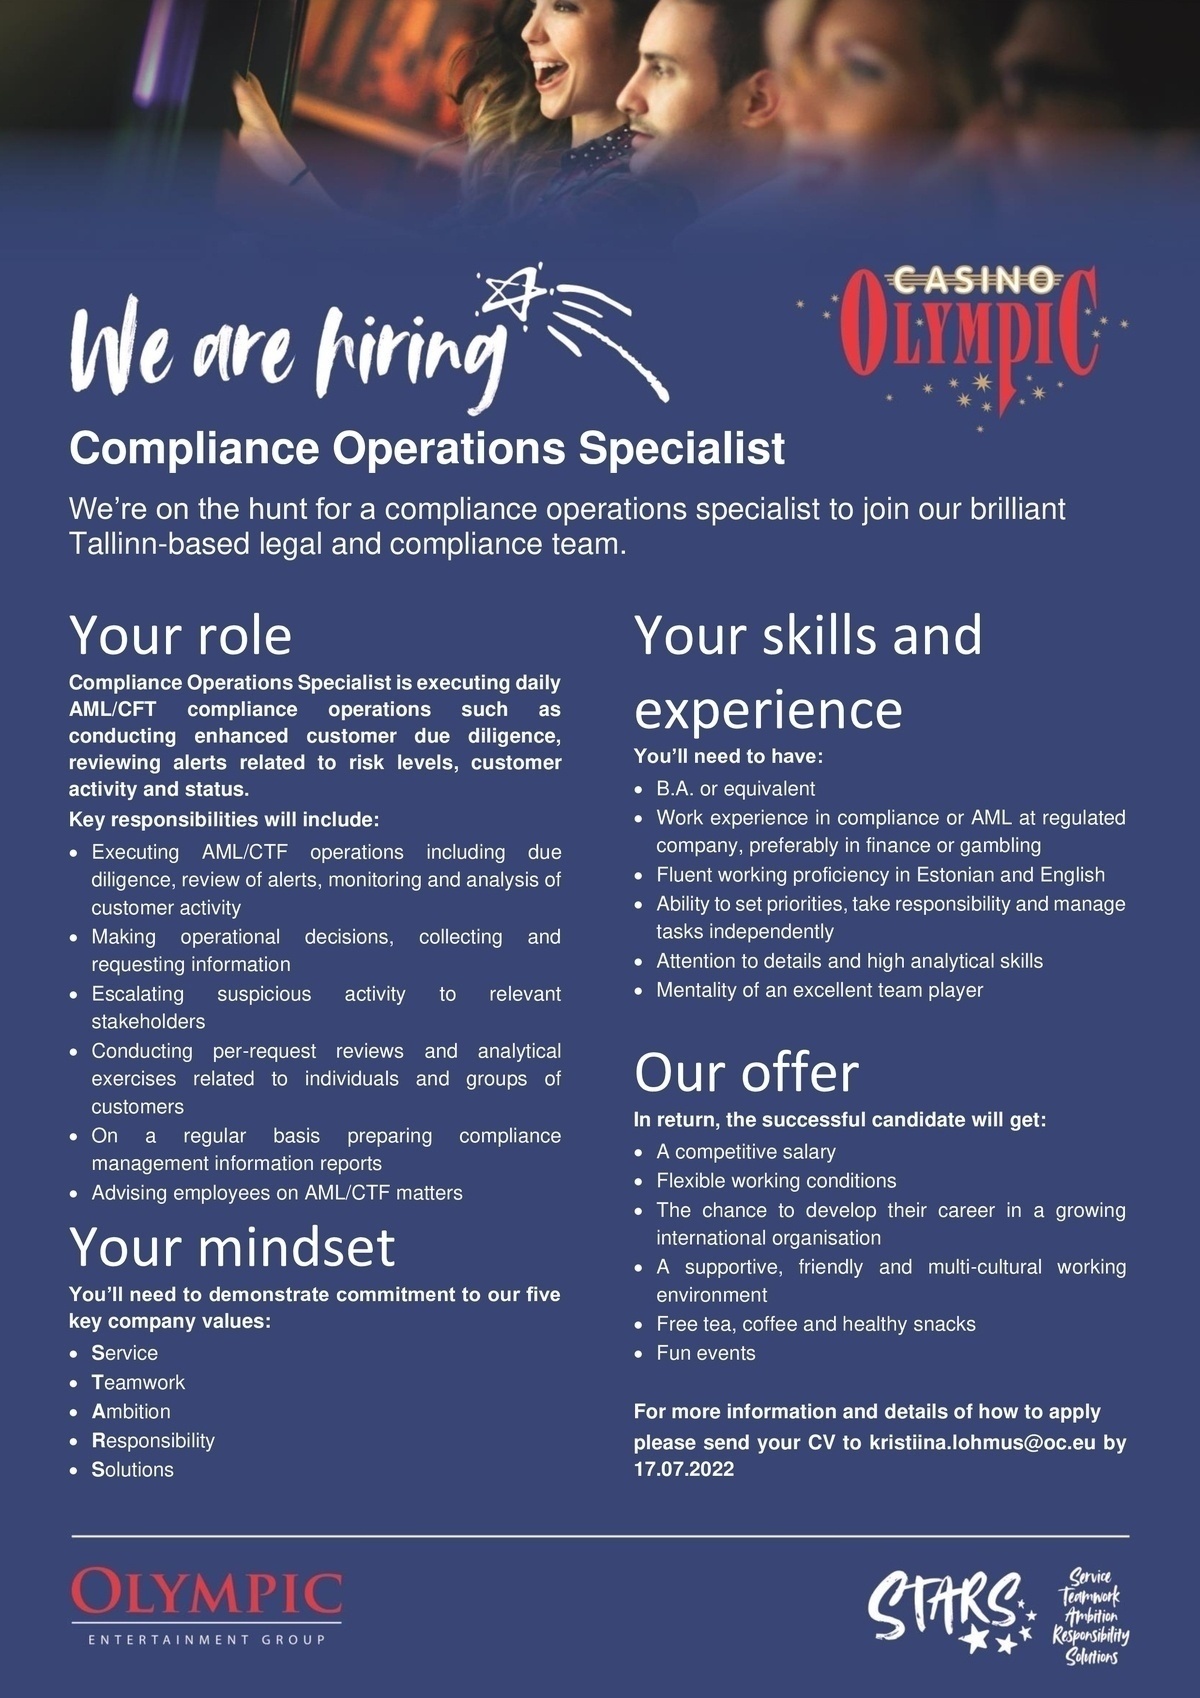 OLYMPIC ENTERTAINMENT GROUP AS Compliance Operations Specialist